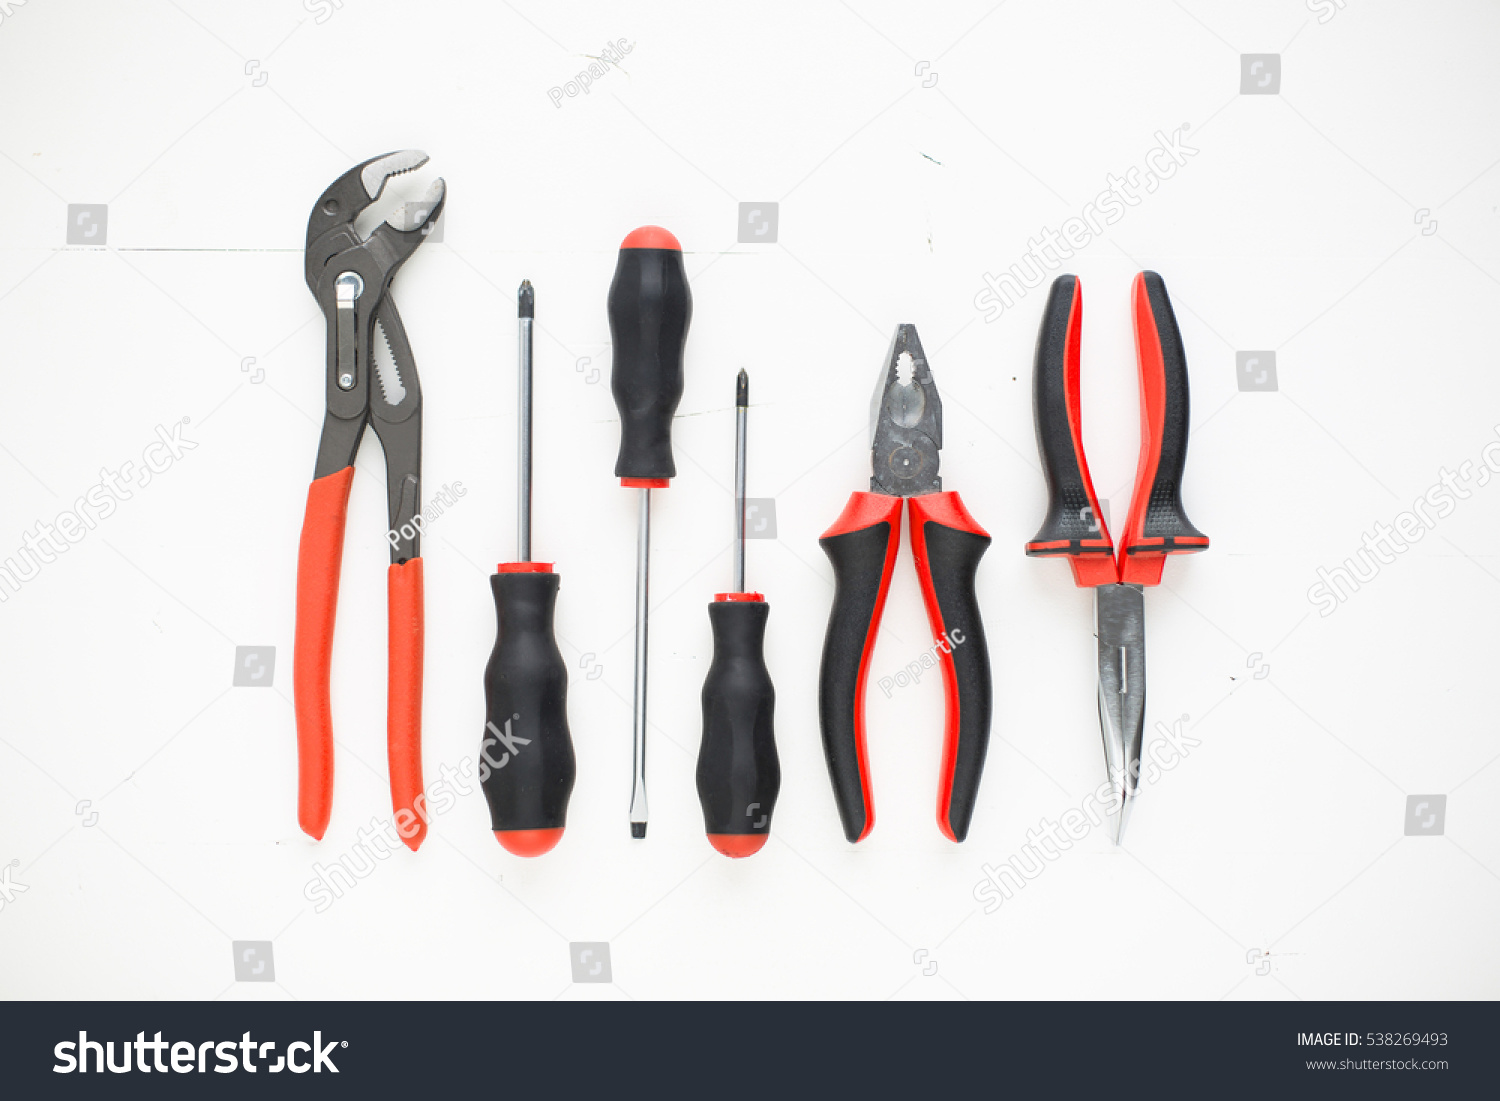 Pliers and screwdrivers on white background. Set of diy hand tools. Work tools of flat lay
 #538269493